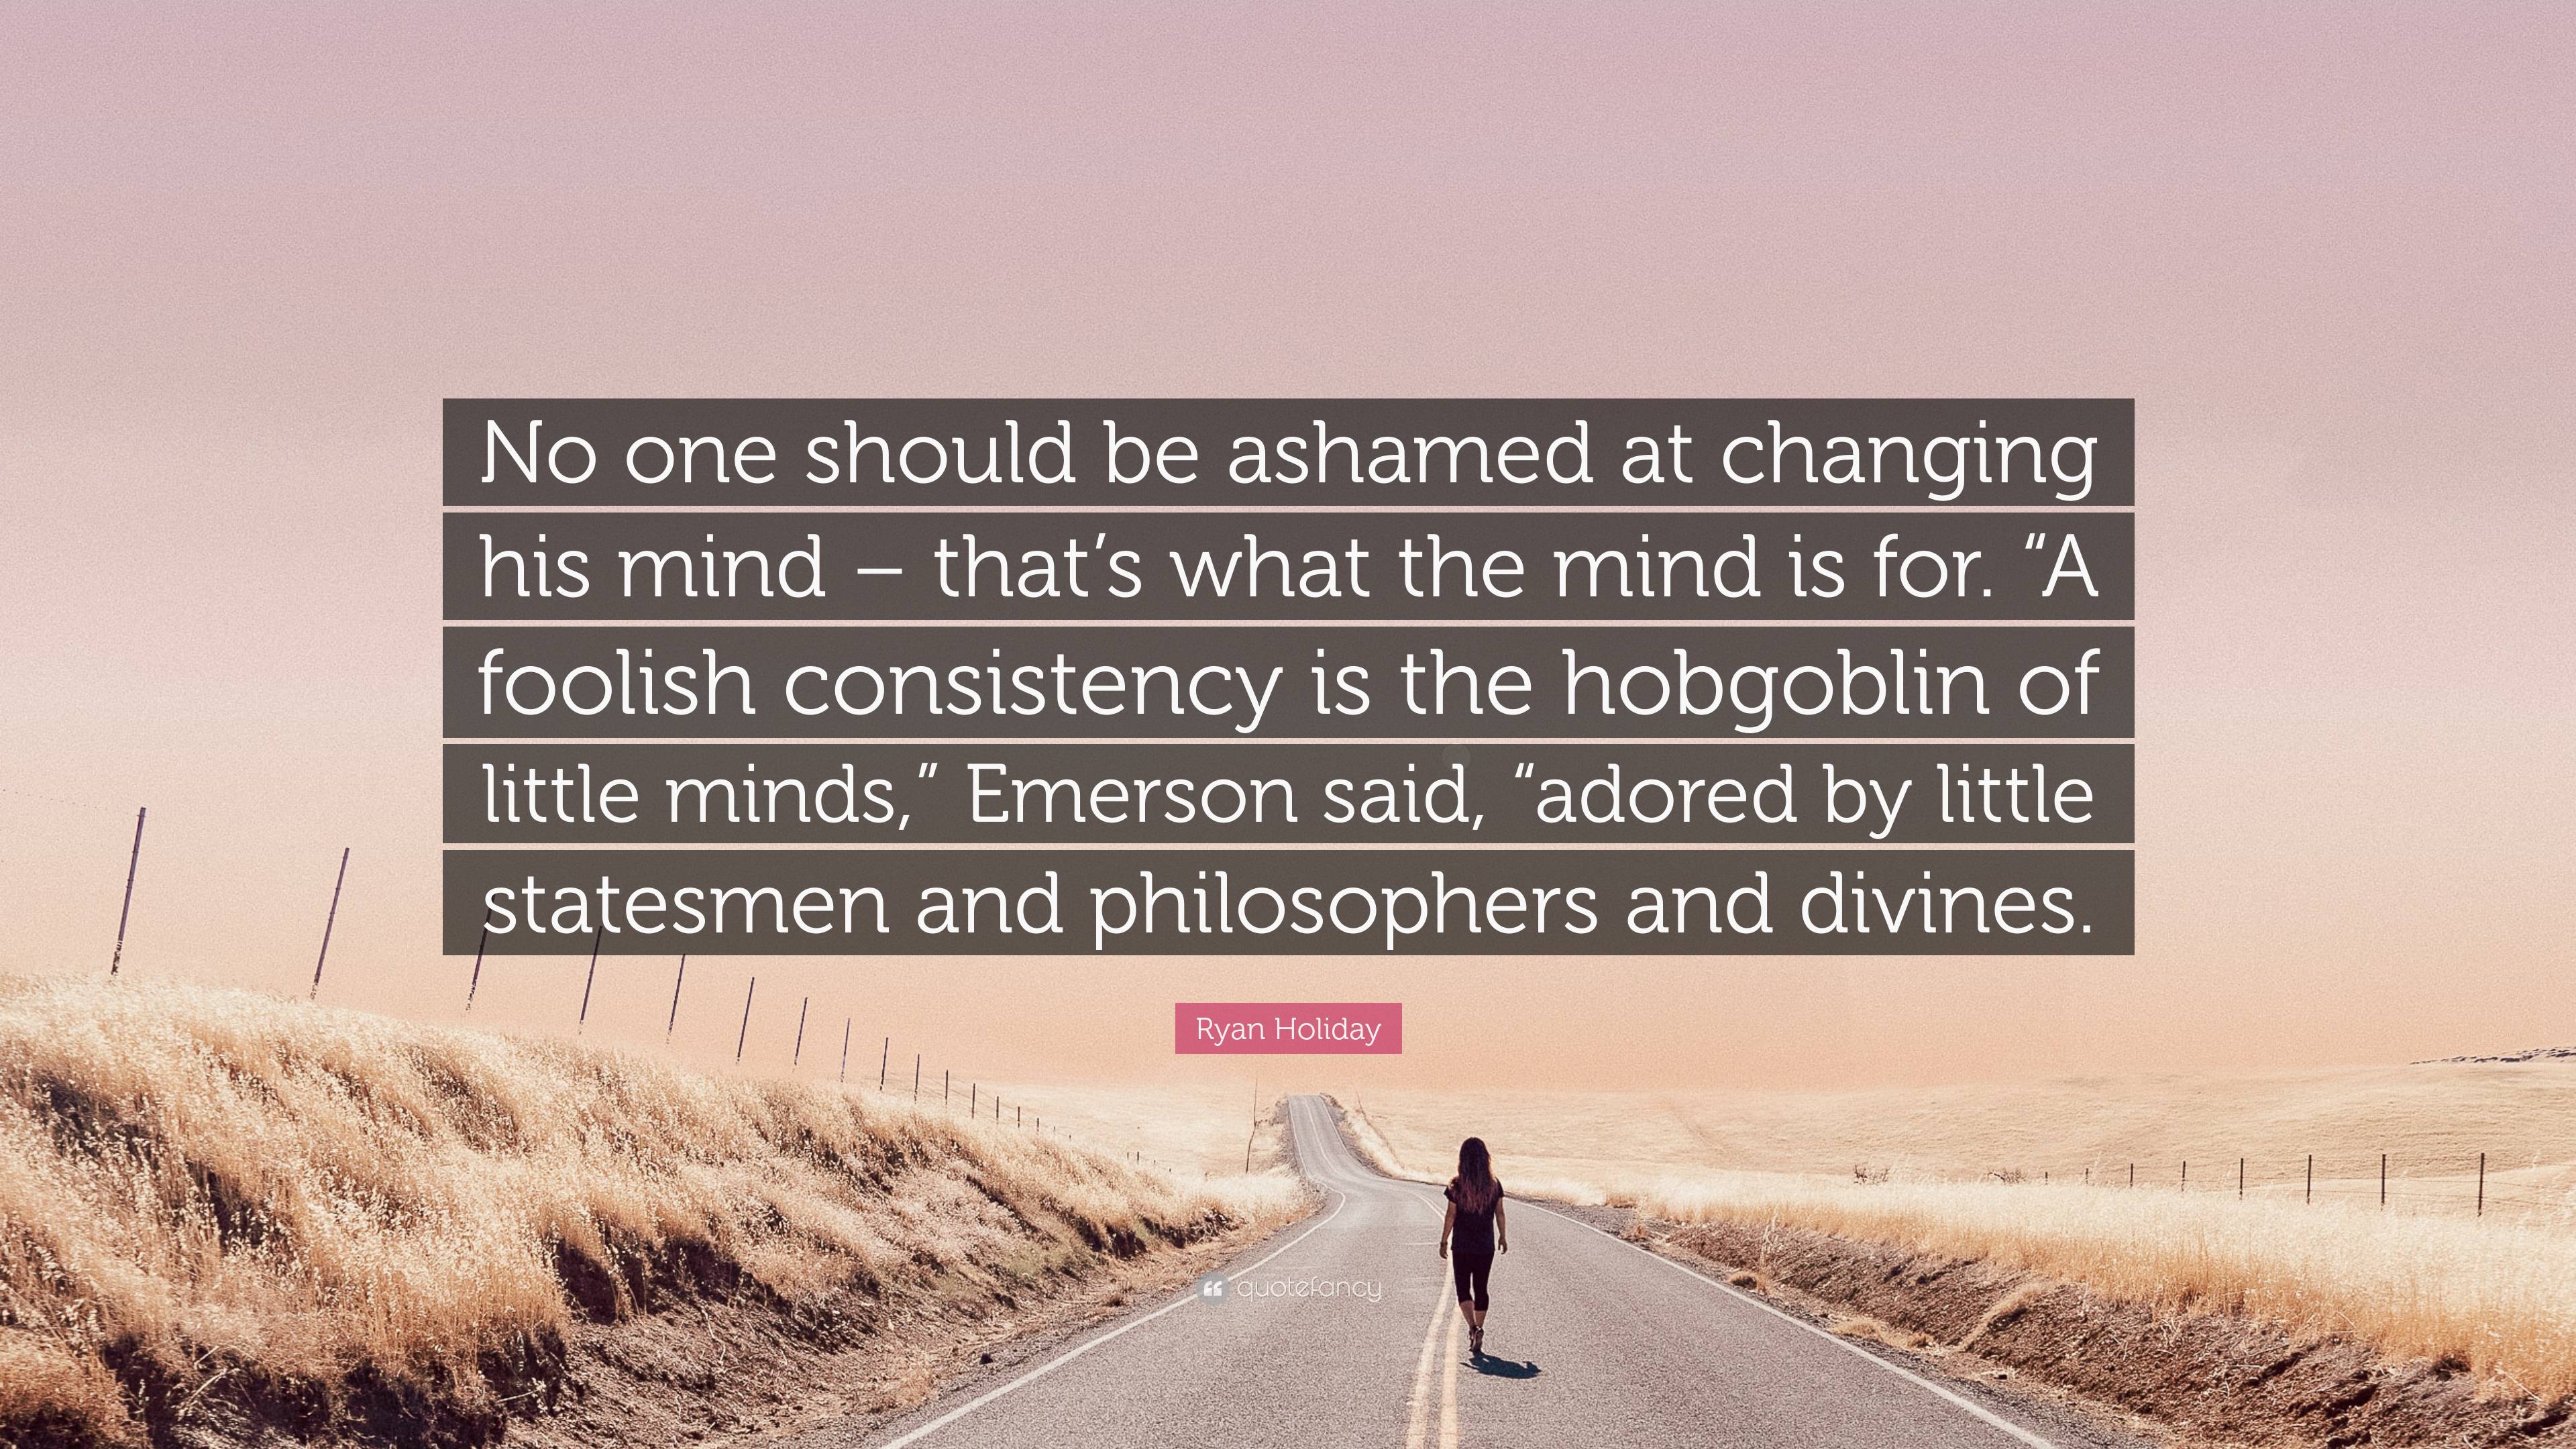 Ryan Holiday Quote: “No one should be ashamed at changing his mind ...